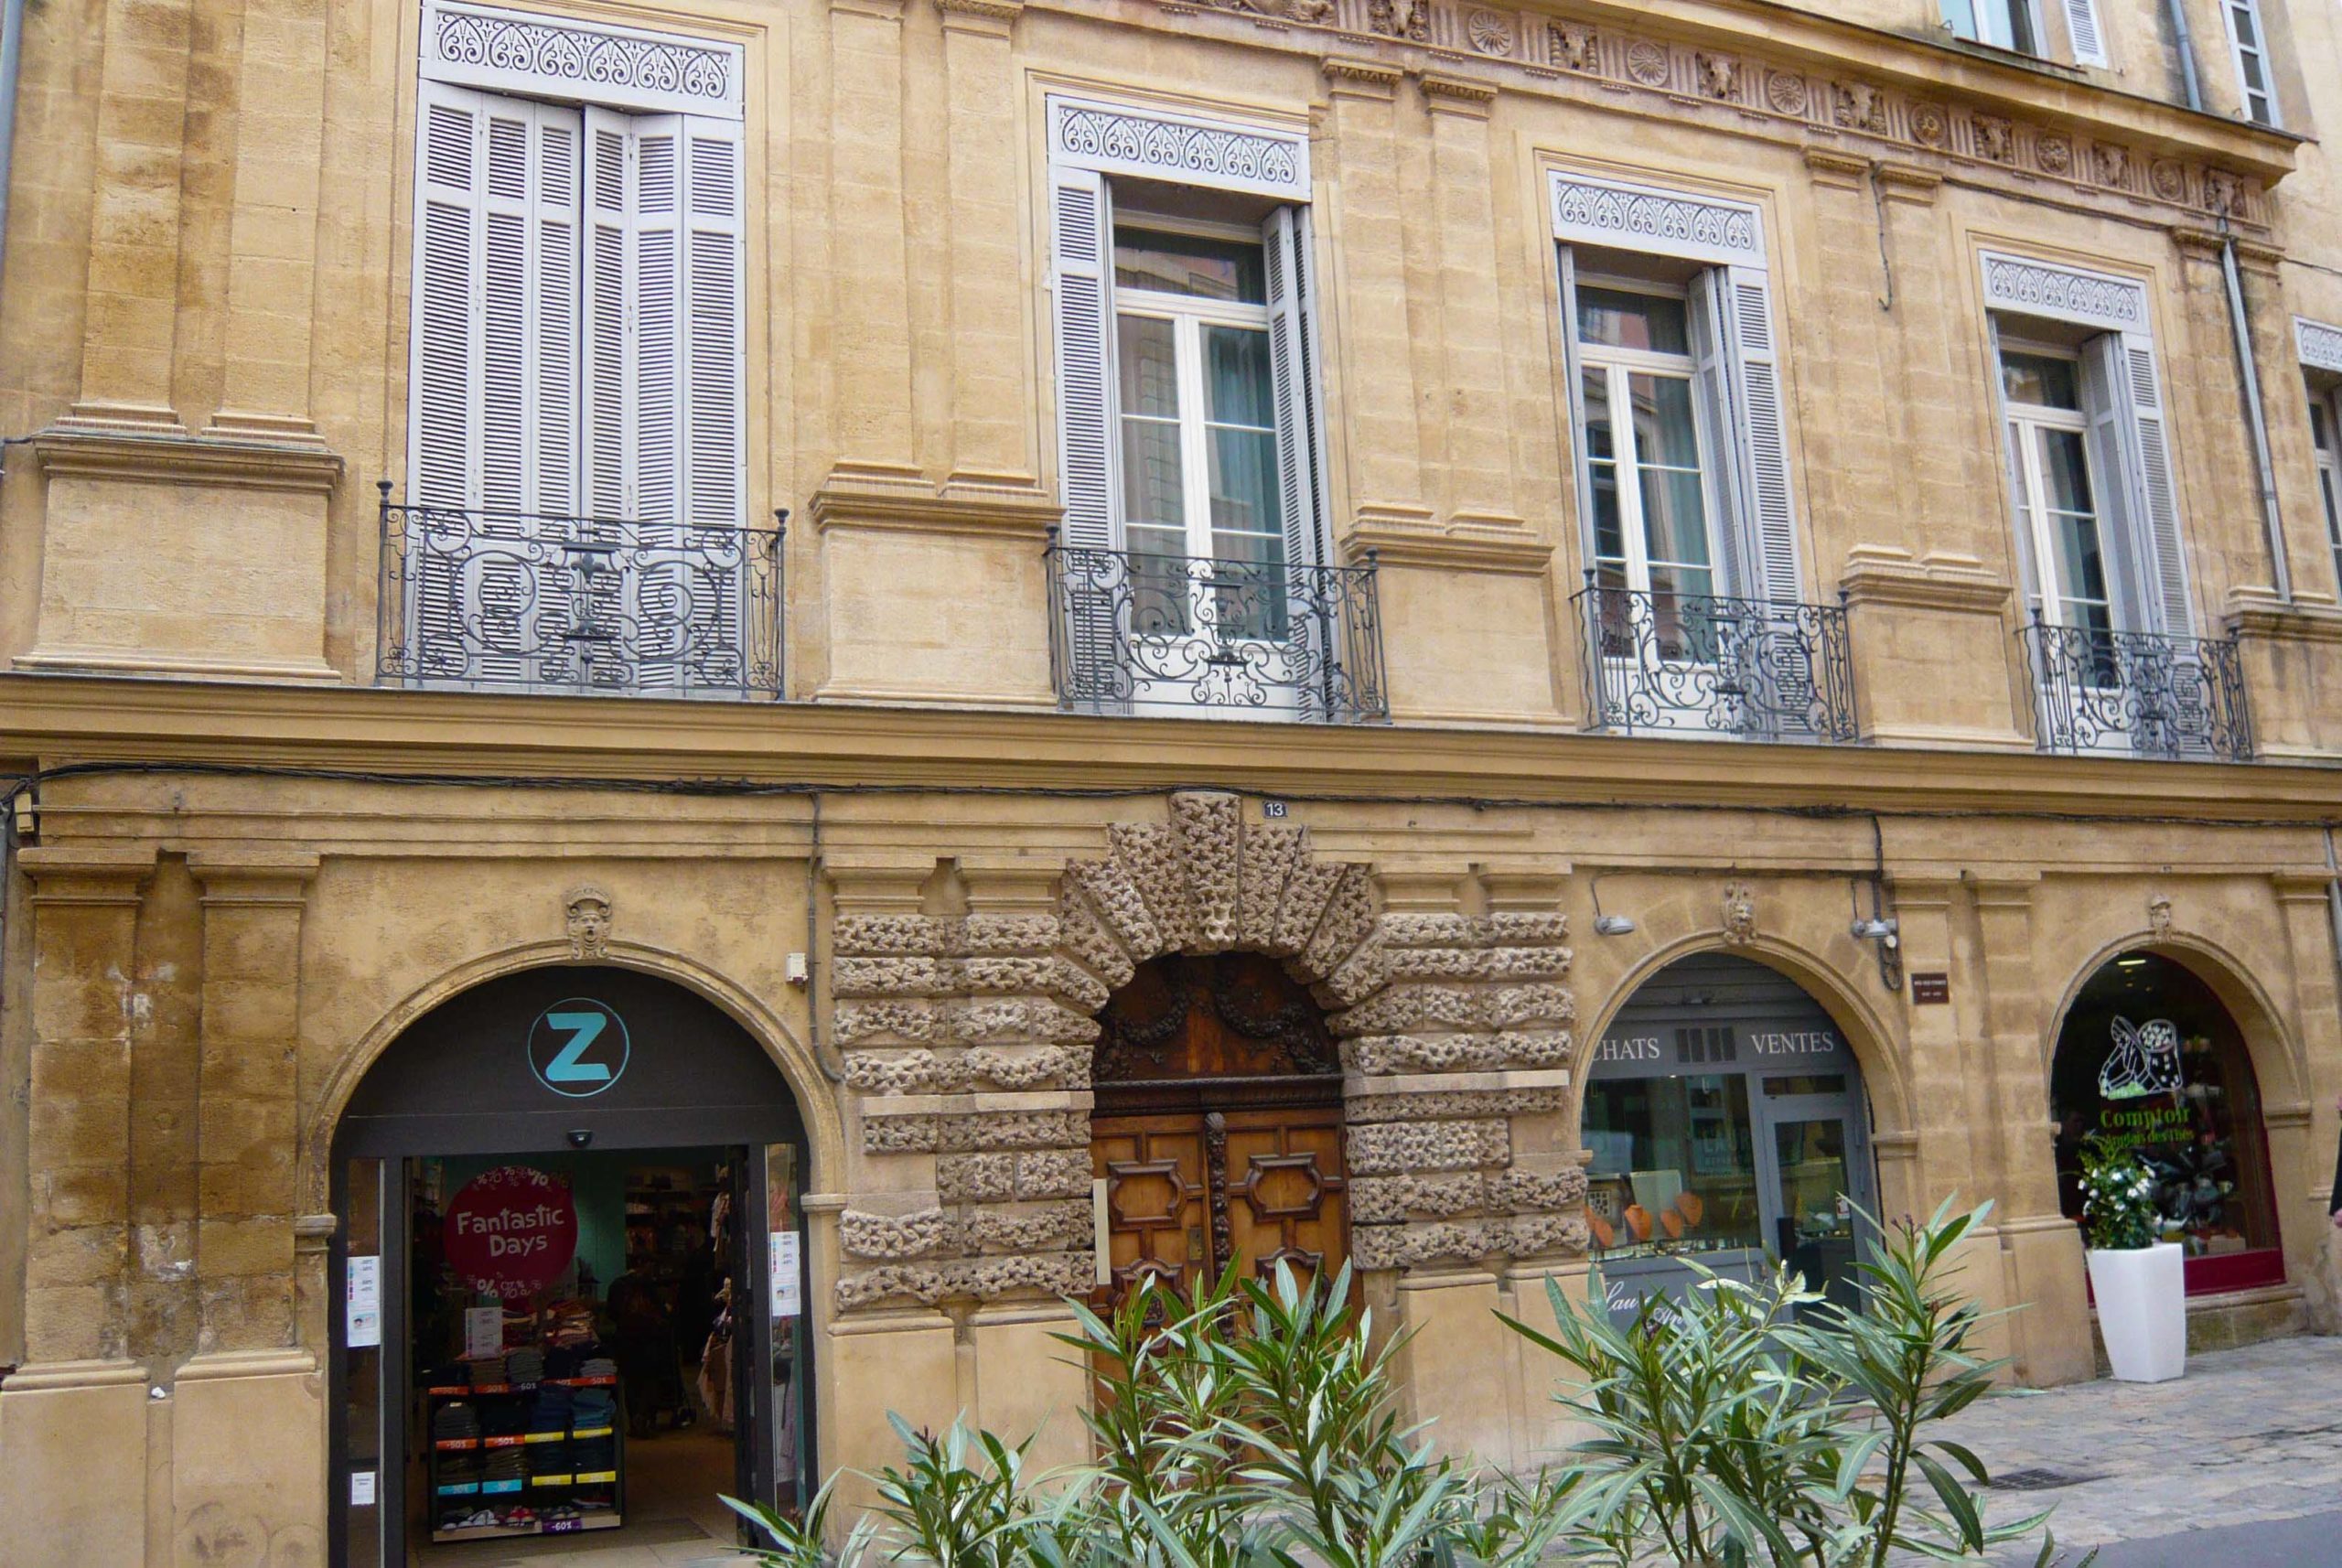 Hôtel Croze de Peyronetti © Le Passant - licence [CC BY-SA 3.0] from Wikimedia Commons